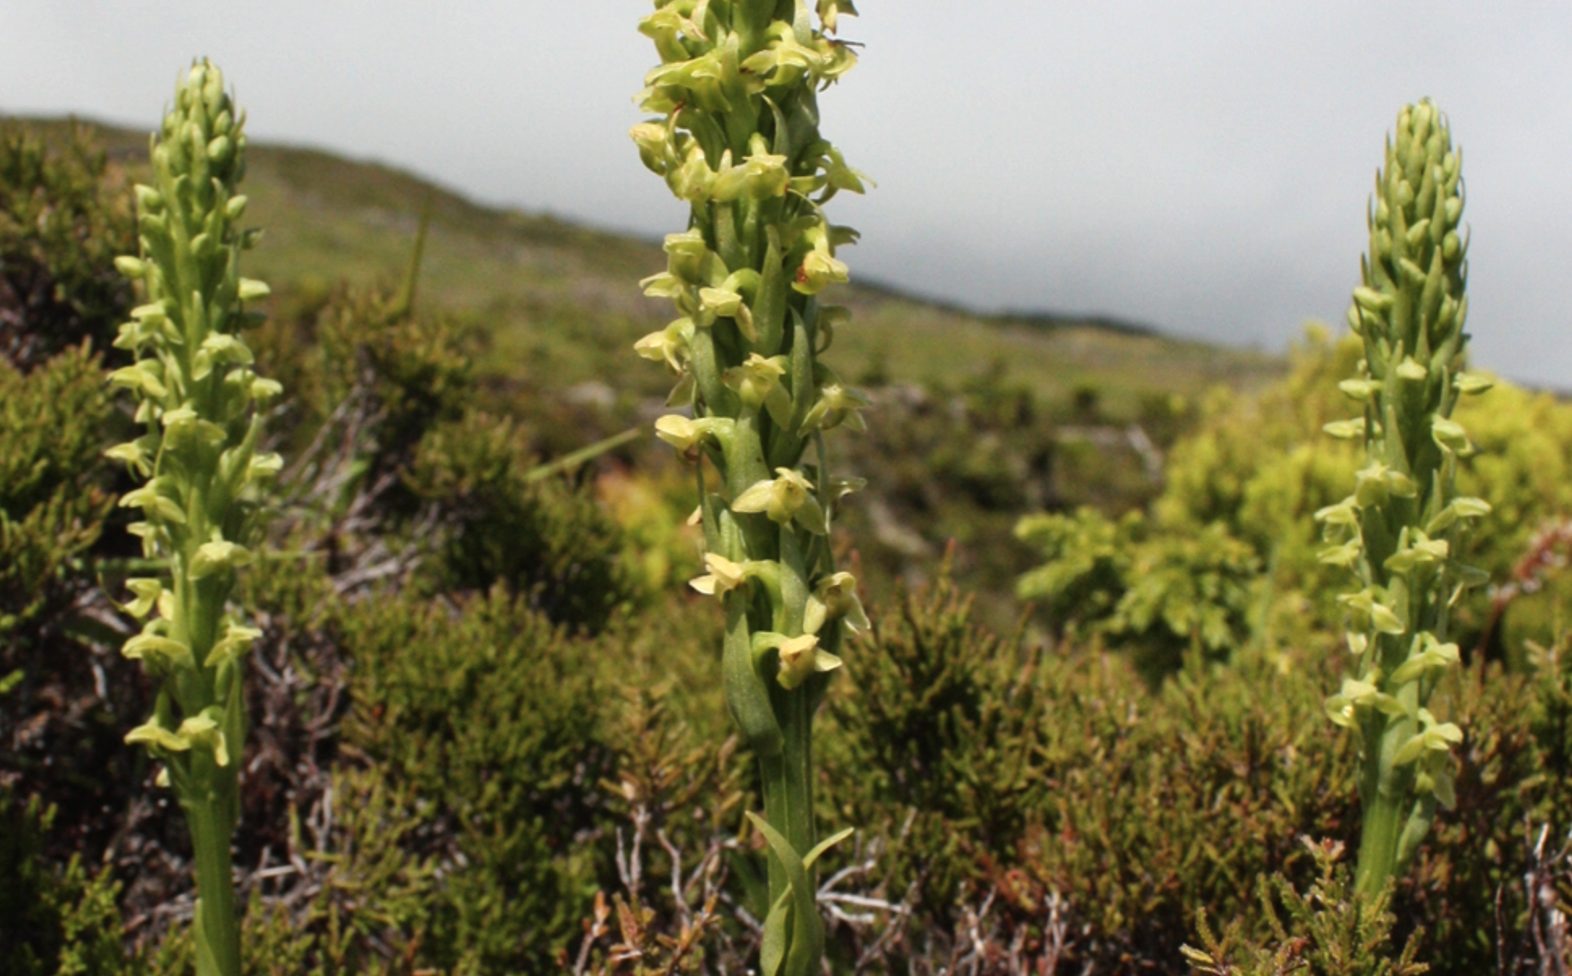 Europe's Rarest Orchid Rediscovered on 'Lost World' Volcano in the Azores